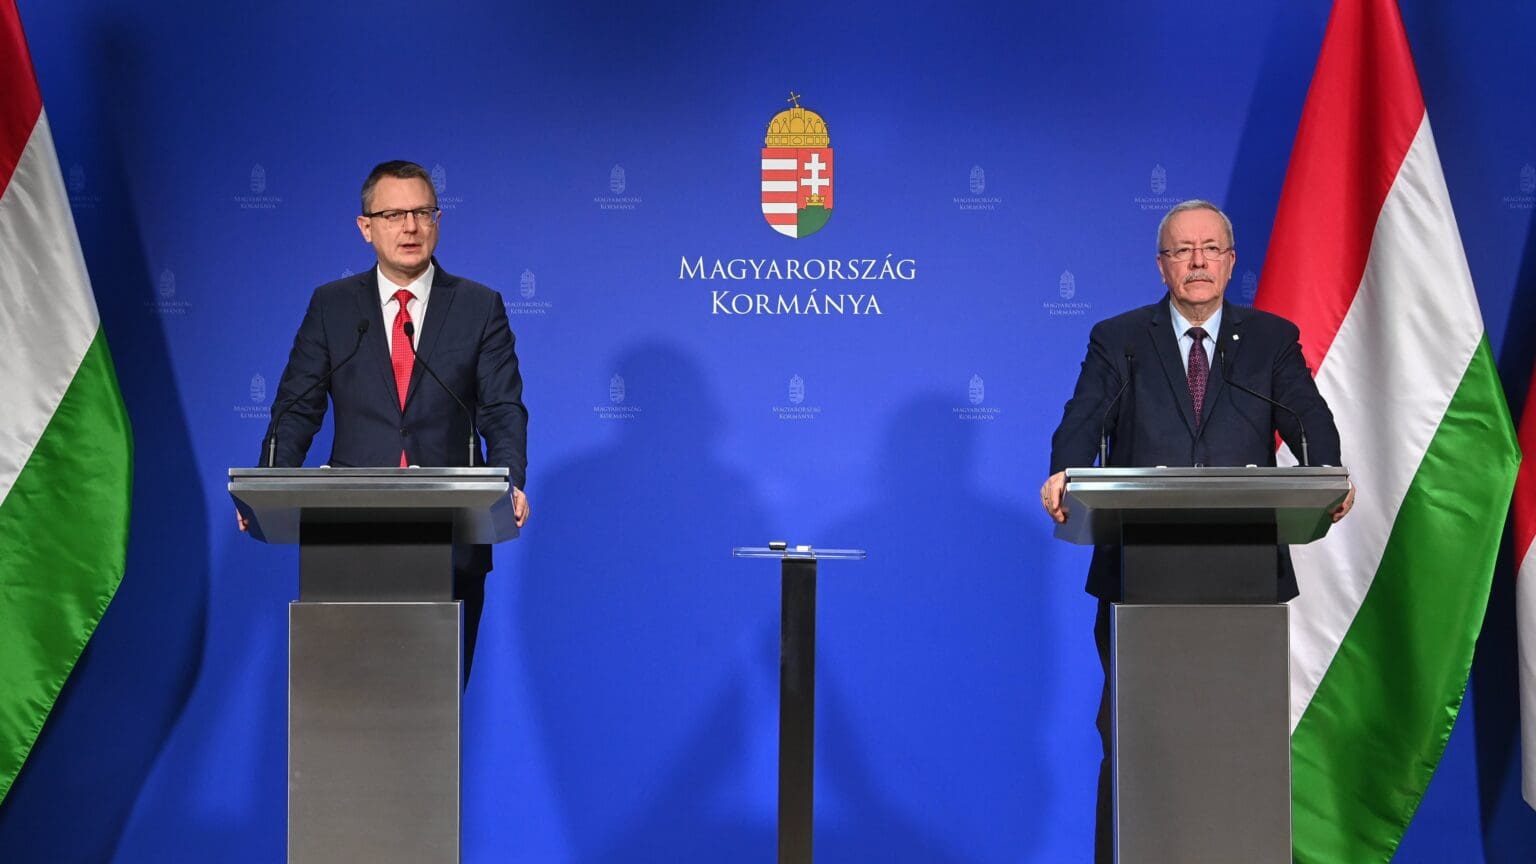 Challenges and Controversies: Hungary’s Response to the EU Migration Pact